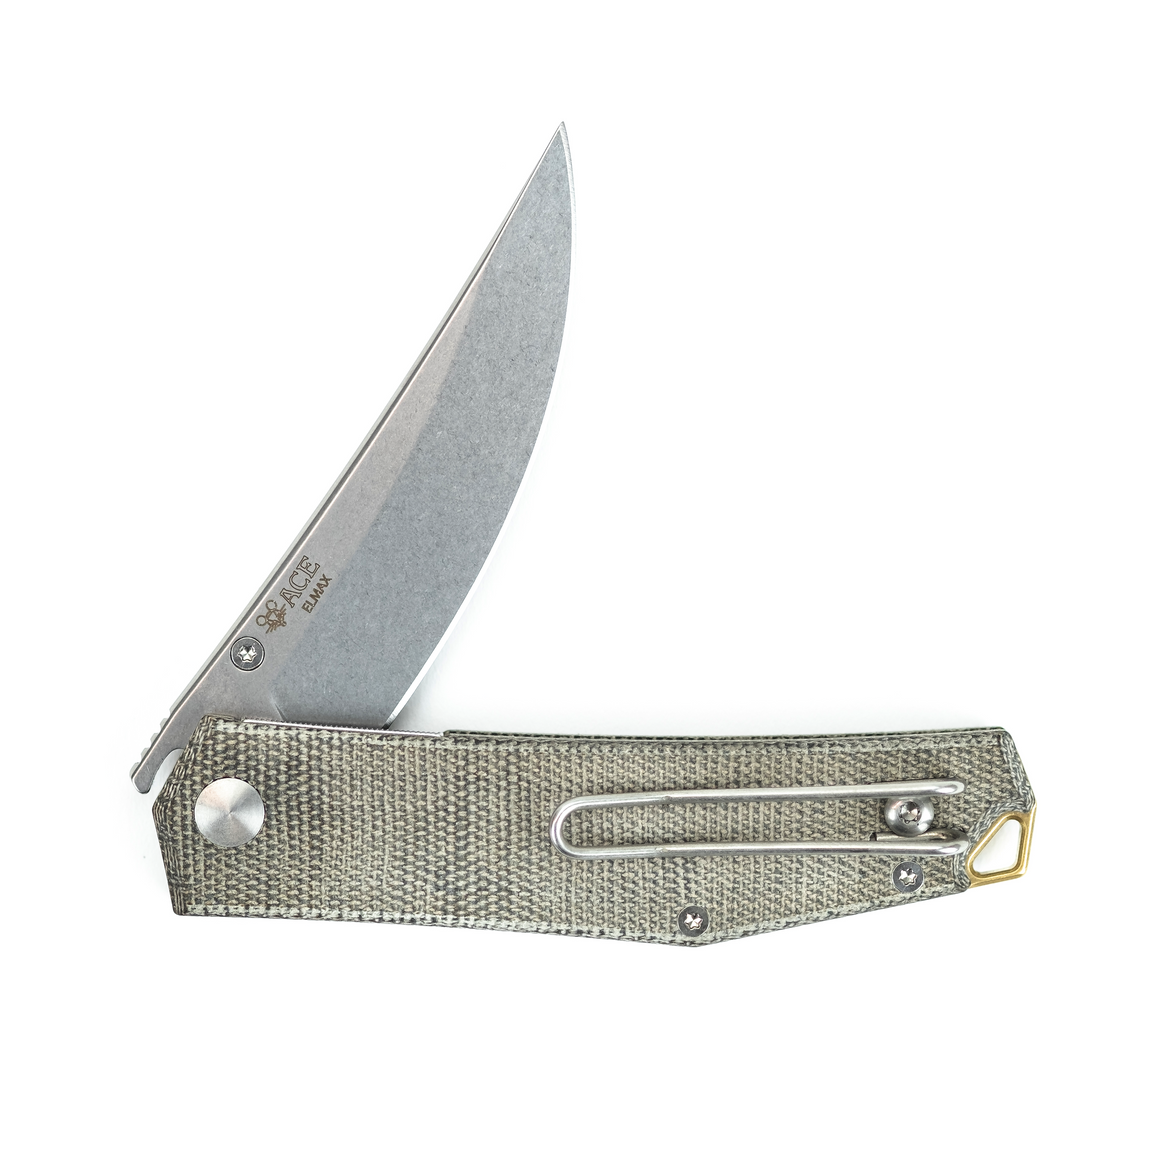 ACE Clyde - Green Canvas and Brass - Elmax Blade Steel, Stonewash finish - Green canvas micarta Handle - back